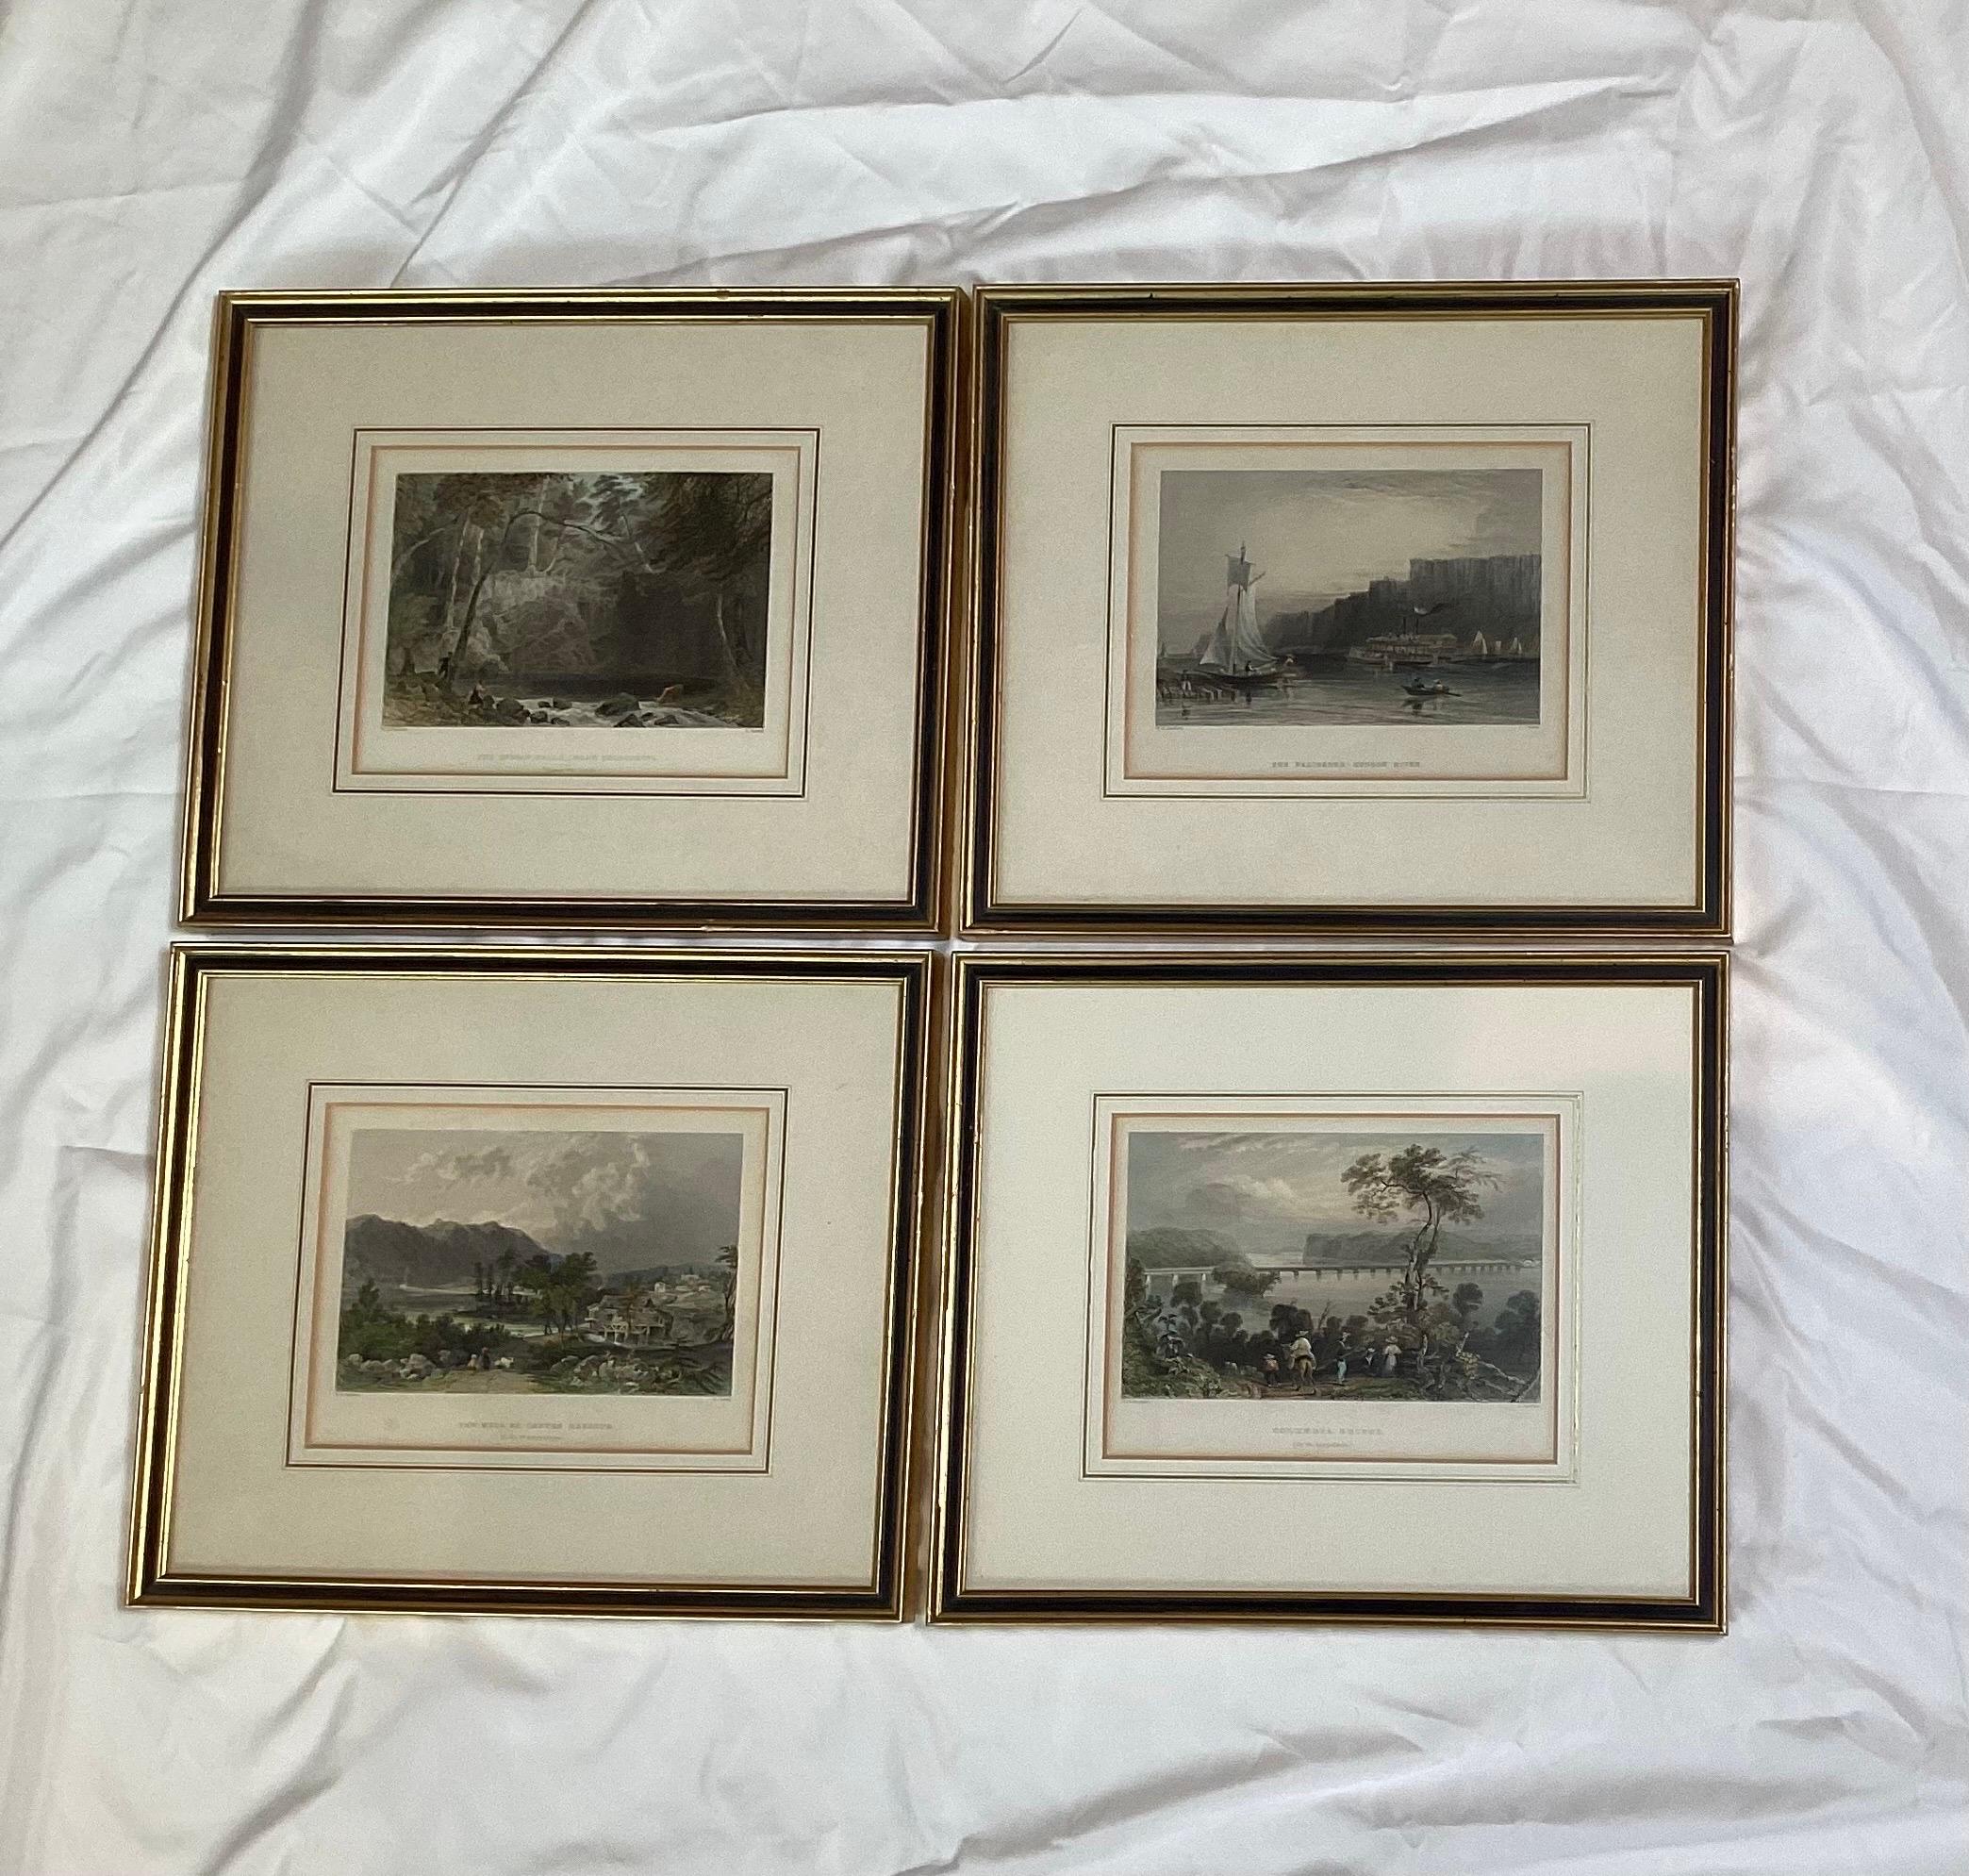 Elegant set of 8 hand colored steel plate printed lithographs by printer H. W. Bartlett London. Circa 1840. The set showing peaceful and beautiful scenes of America in gilt and ebonized frames with hand gilt bordered matts.